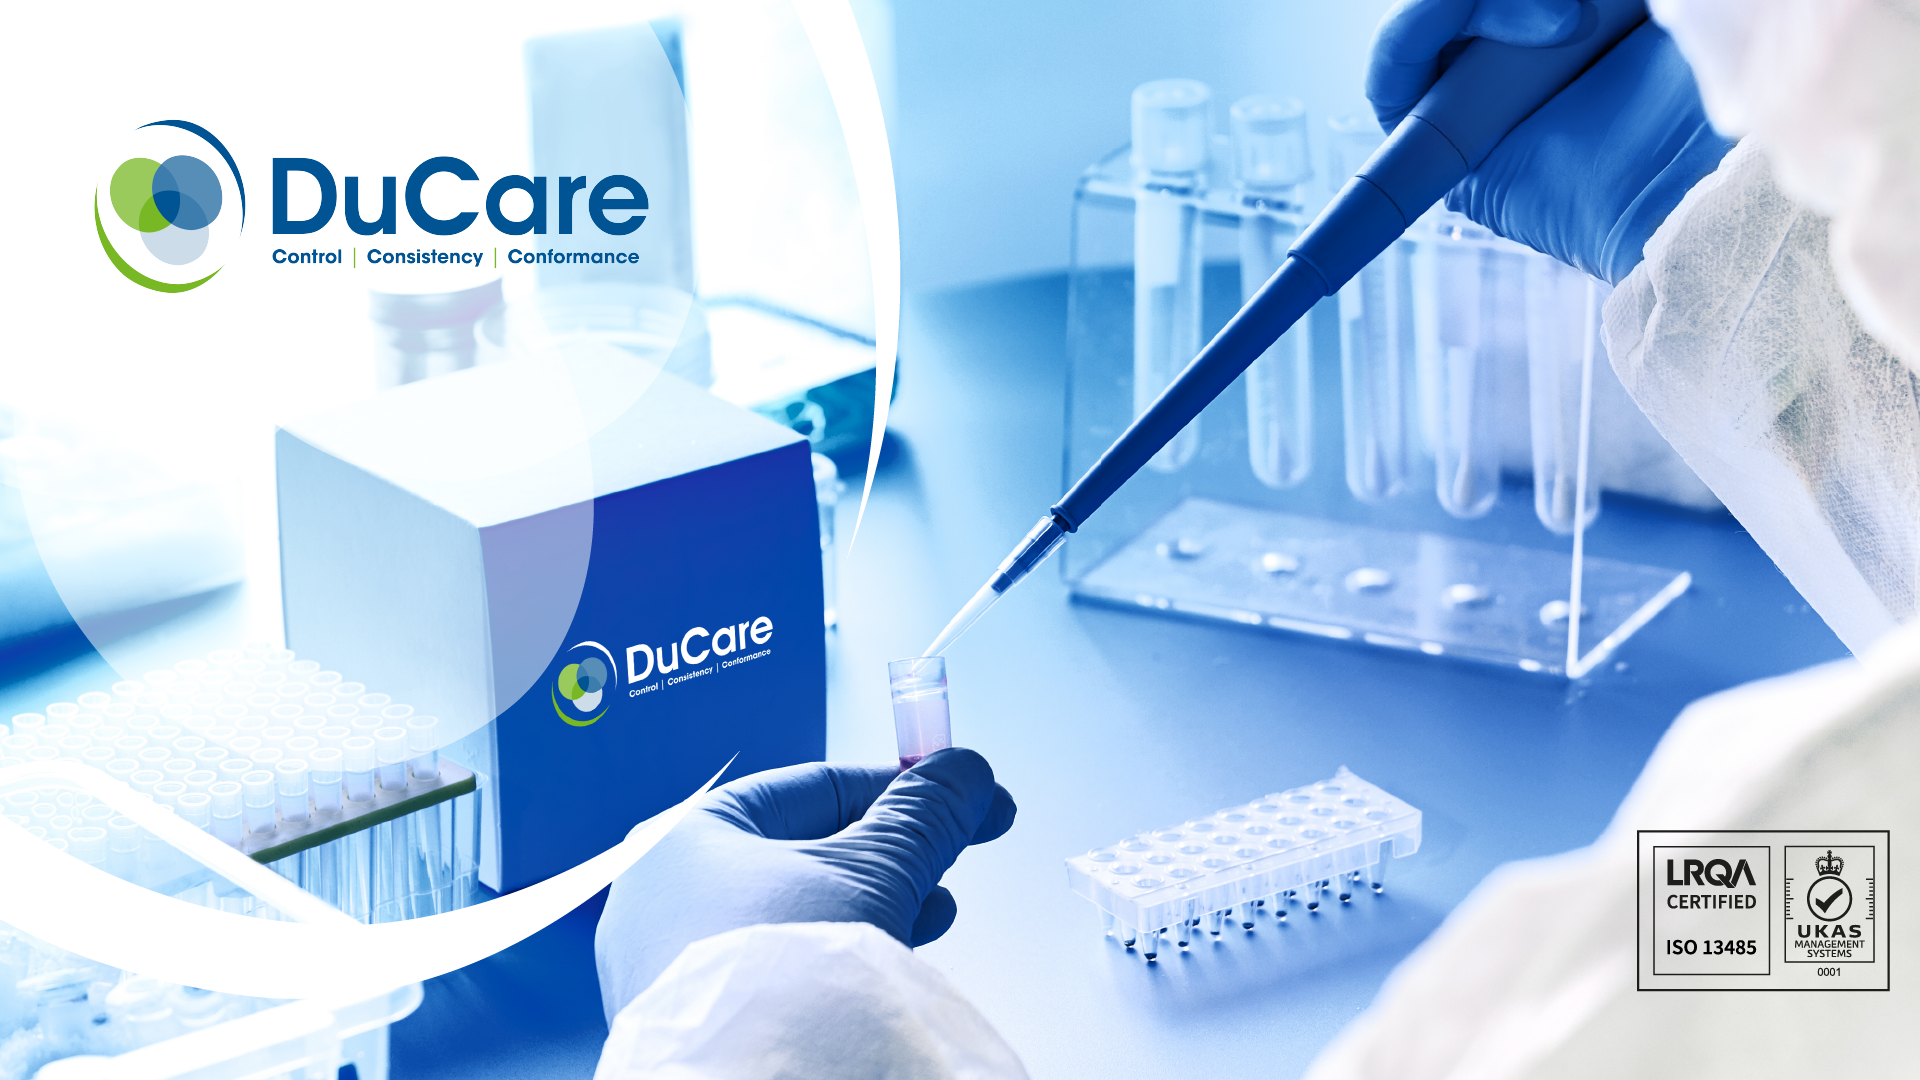 DUCOR PETROCHEMICALS LAUNCHES PRODUCT RANGE FOR HEALTHCARE & LIFE SCIENCE APPLICATIONS UNDER ISO 13485 CERTIFICATION